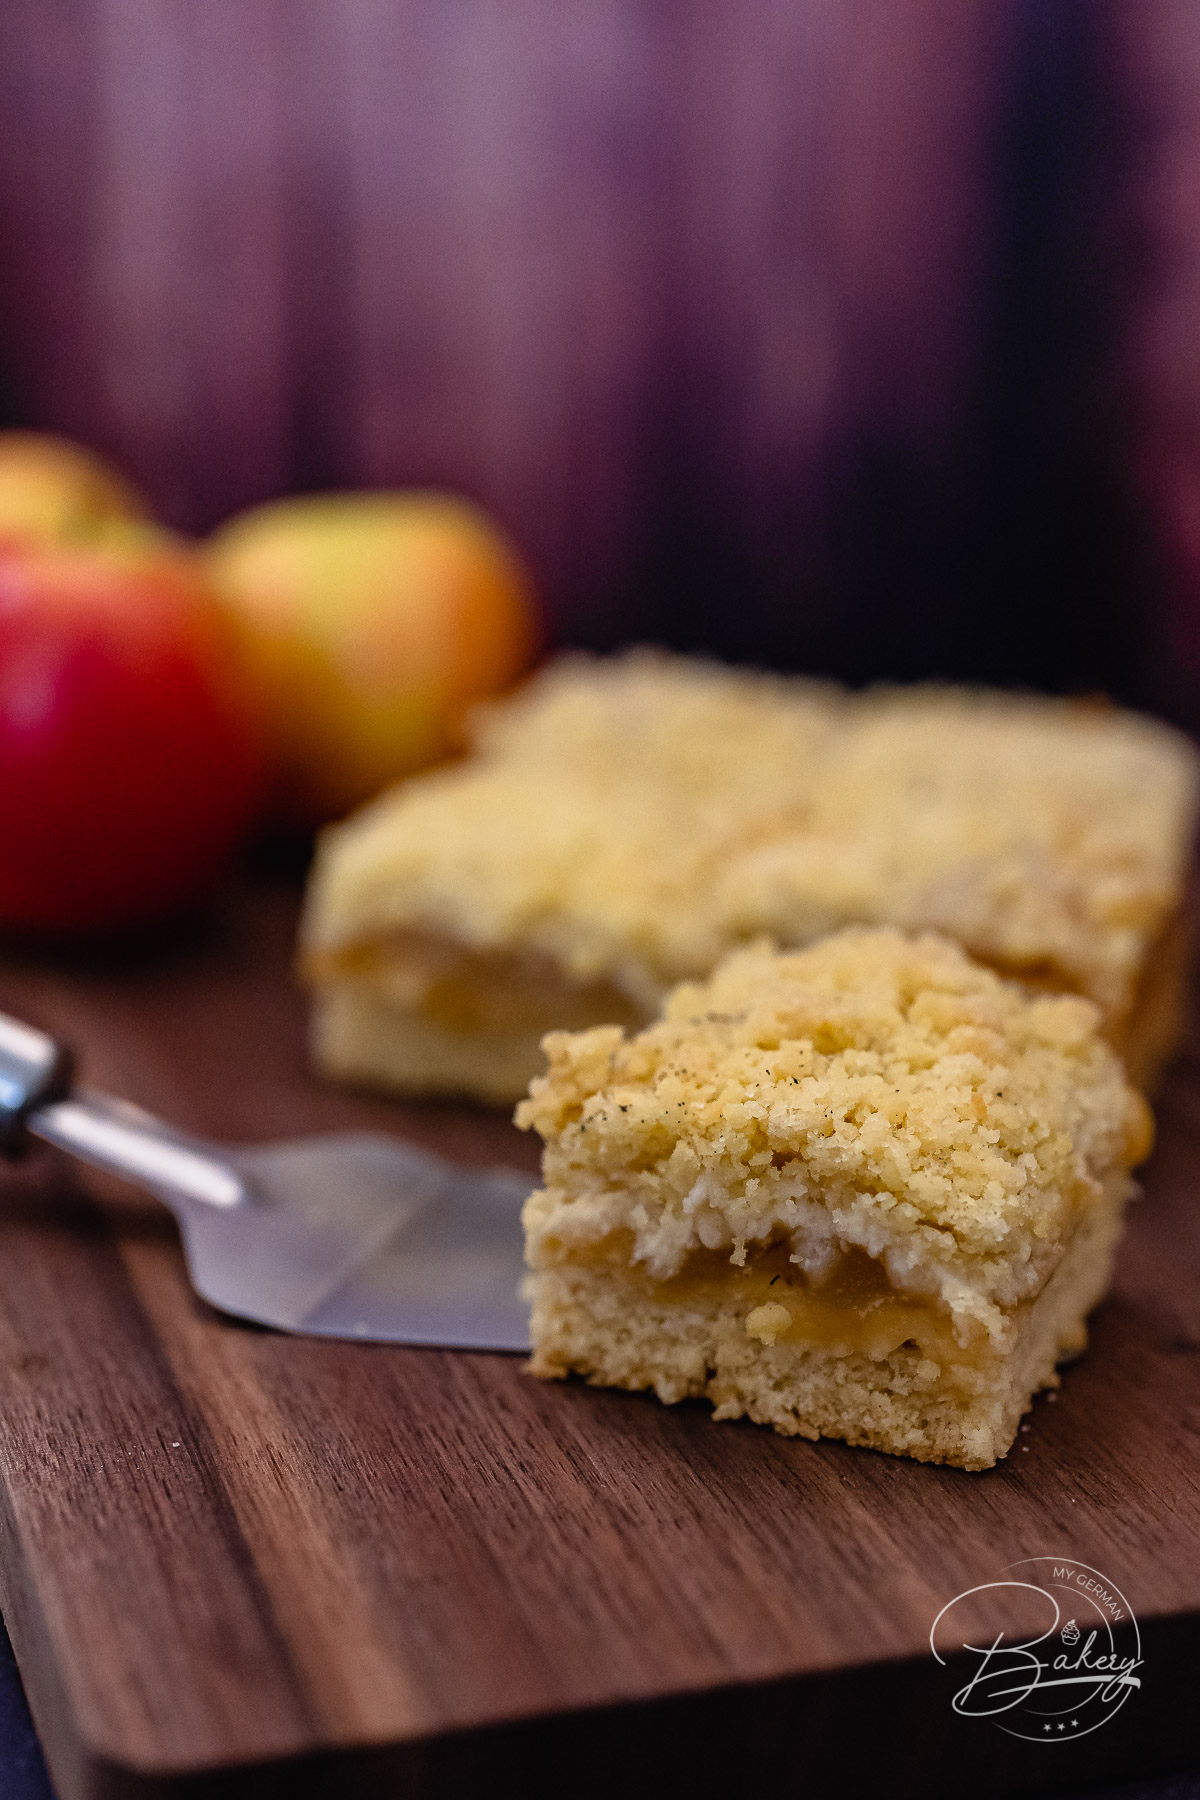 Simple apple cake with crumble recipe without yeast - apple cake and crumble cake with applesauce - without yeast very simple and fast - fresh apples - apple cake recipe without yeast with crumble - quick and easy with shortcrust pastry - Quick and easy apple cake with crumble recipe for a crumble cake with applesauce instead of apples. Fruit cake without milk and without yeast for